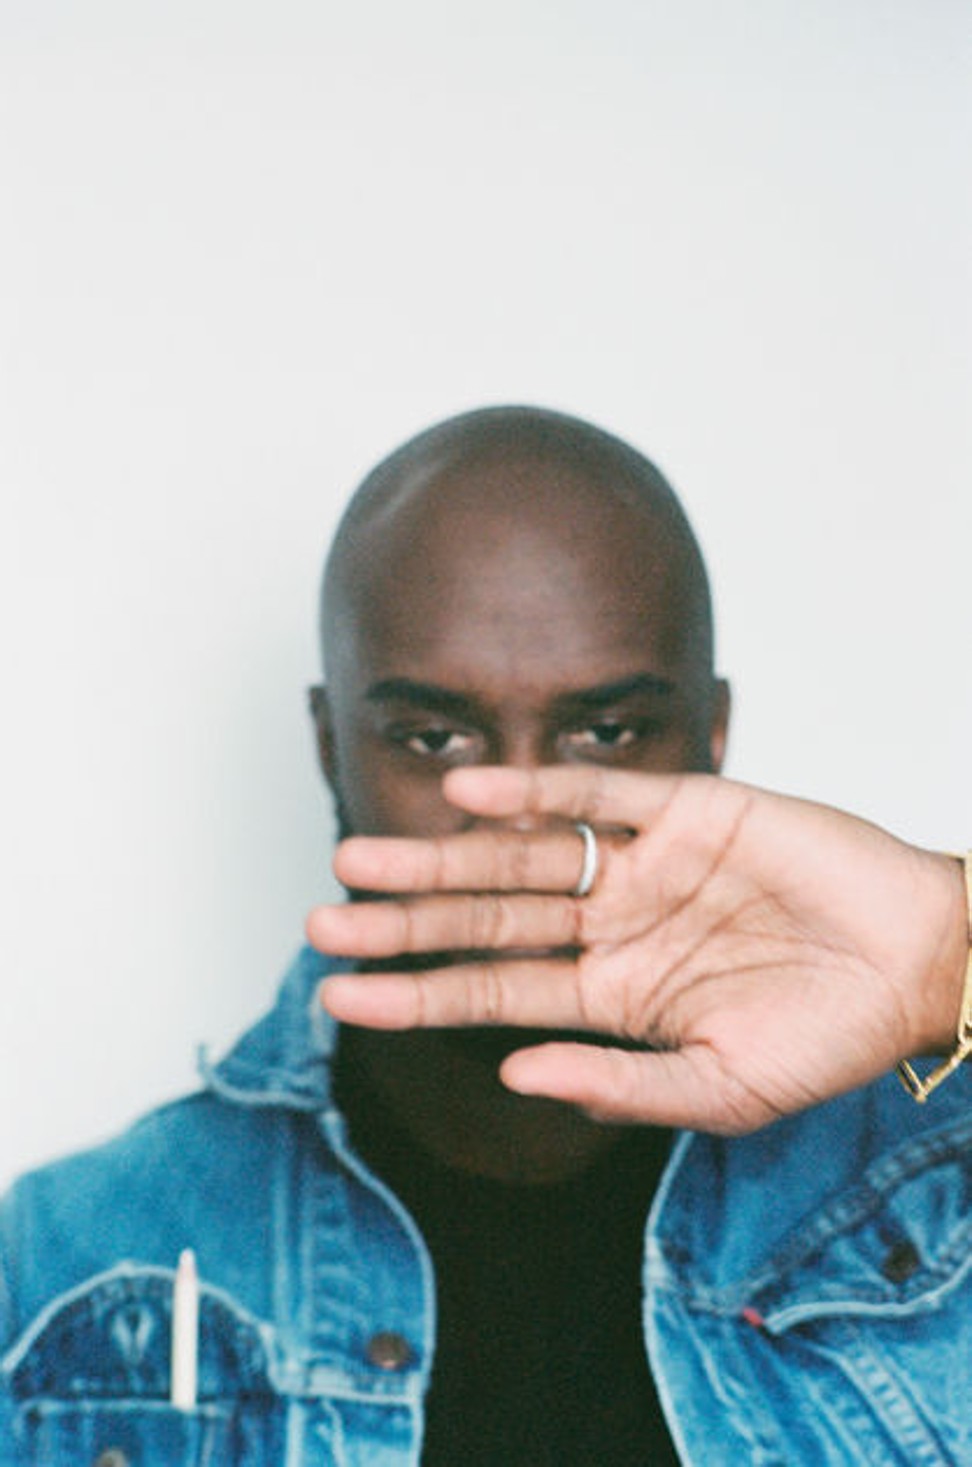 Fashion designer Virgil Abloh, who founded his own high-end streetwear brand Off-White